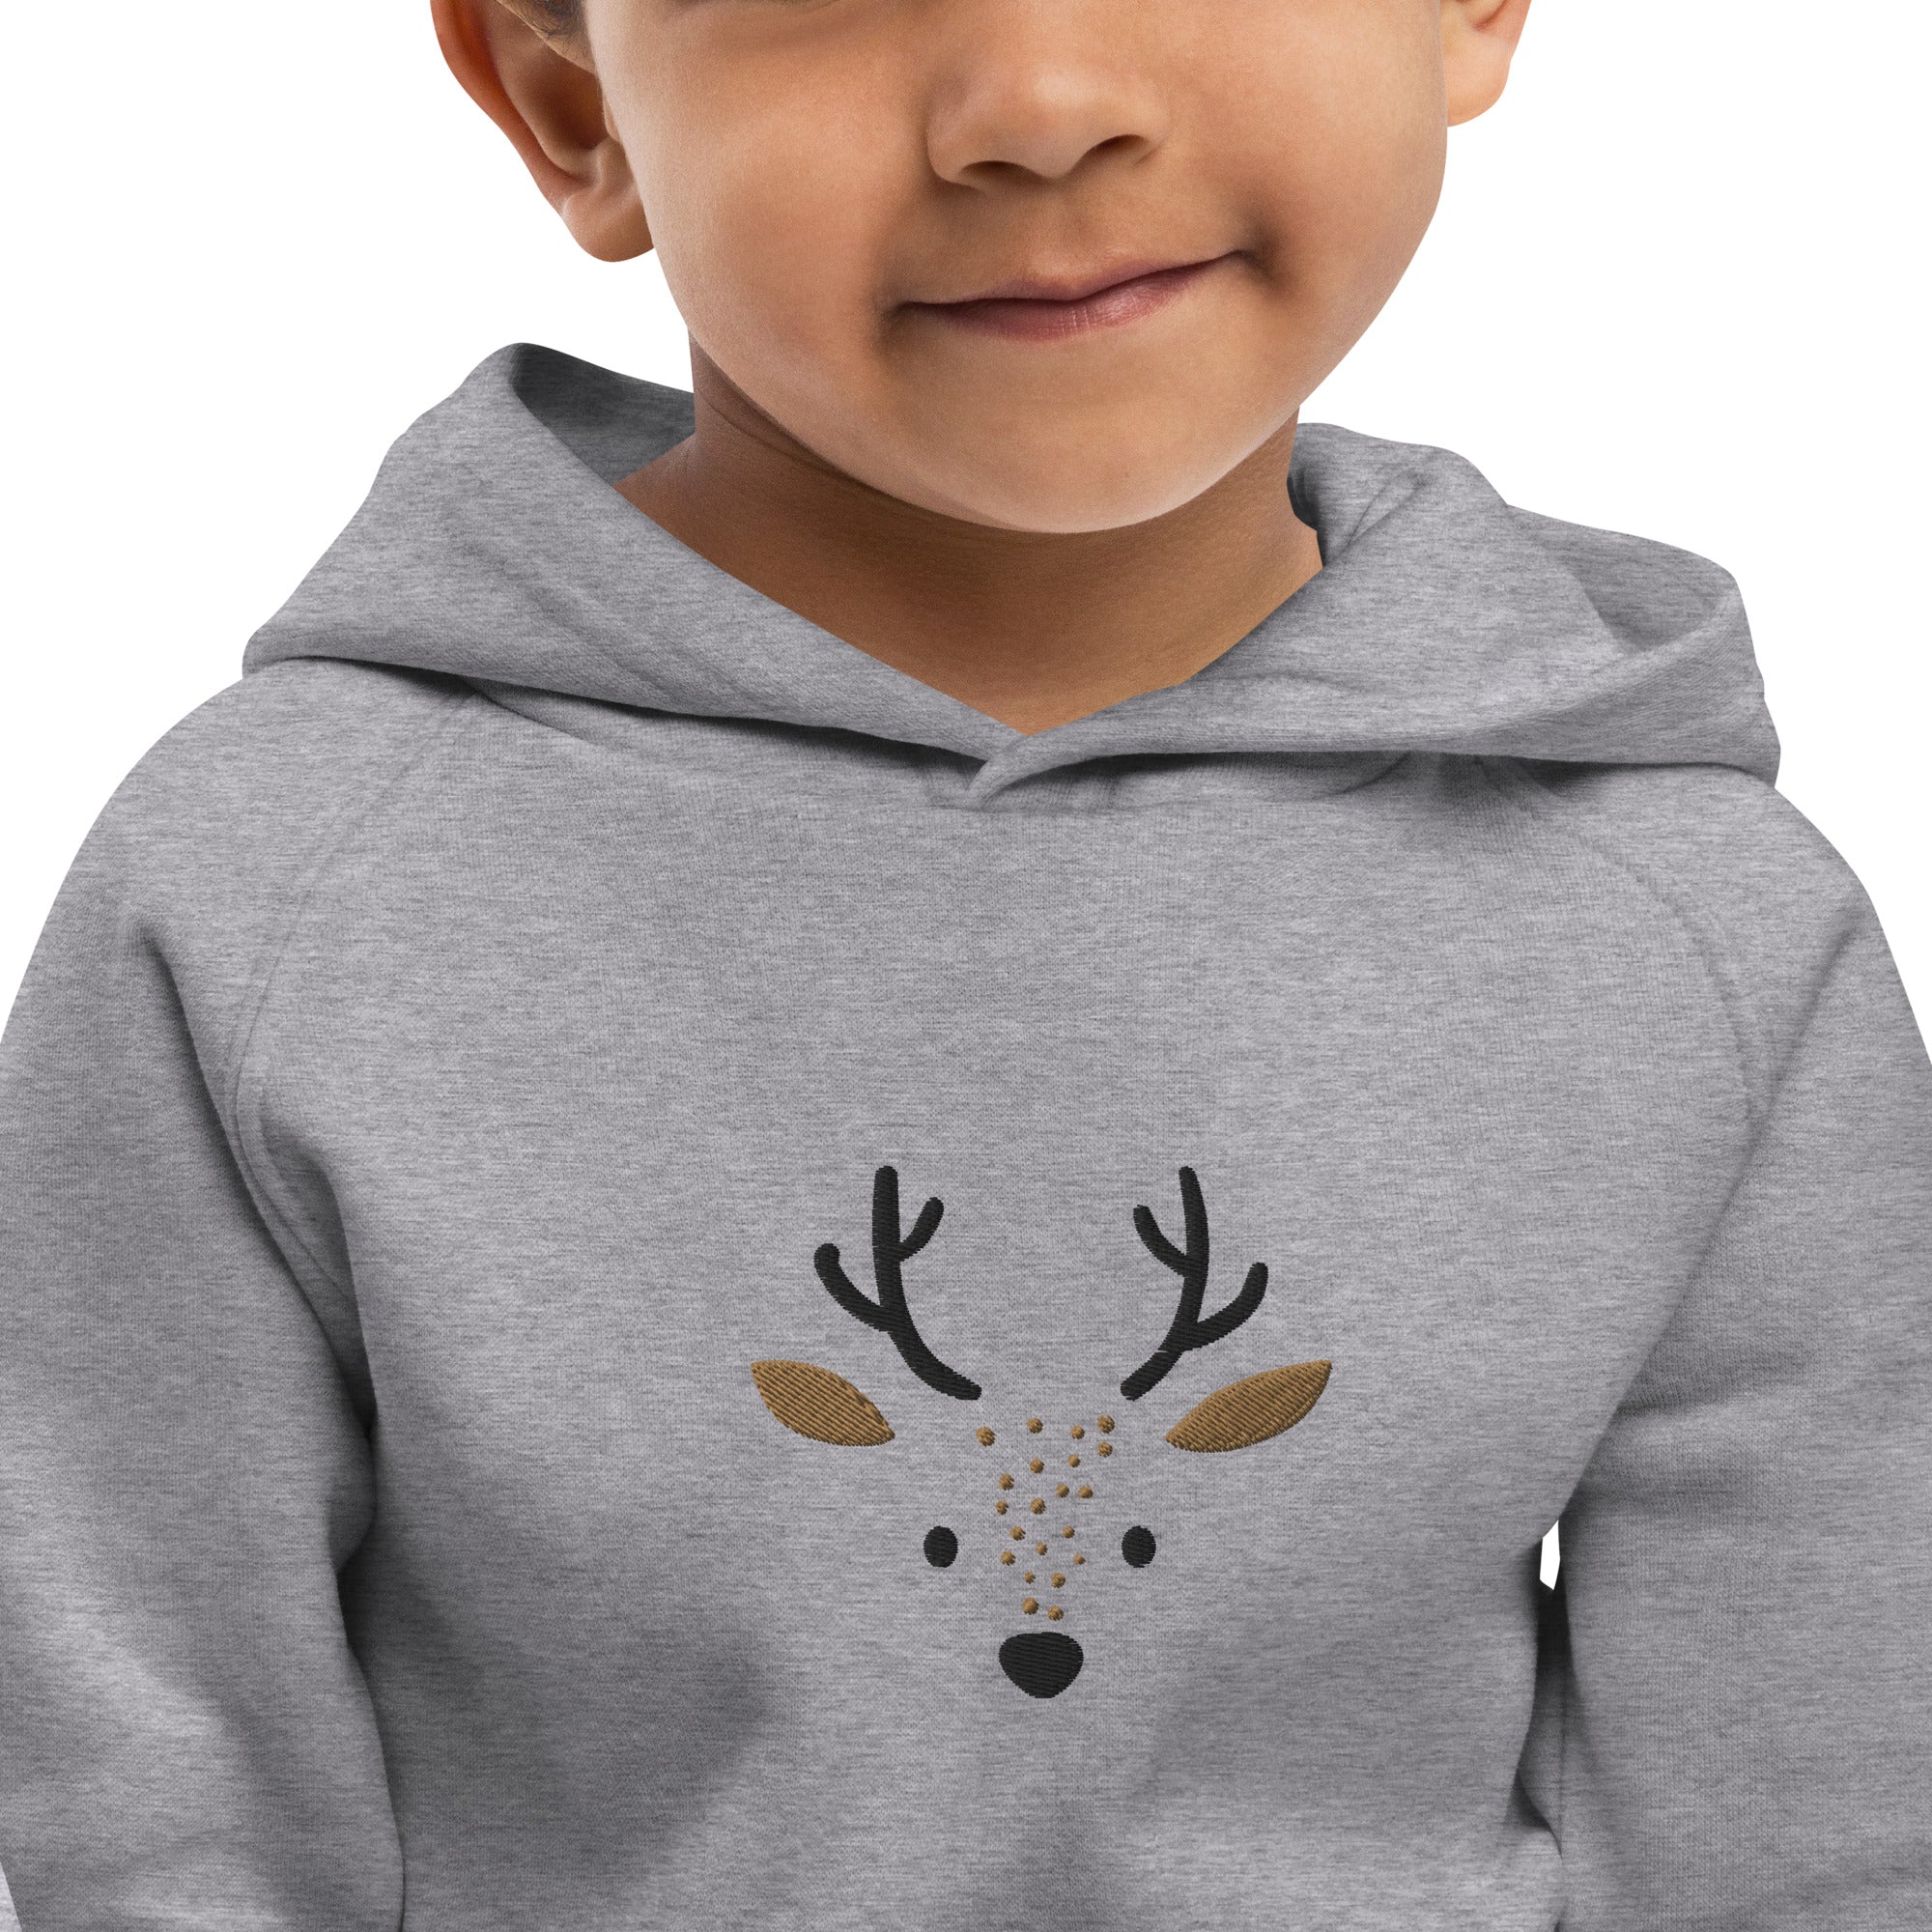 Deer 1 Kids Eco Hoodie with cute animals, Organic Cotton pullover for children, gift idea for kids, soft hoodie for kids for Christmas-14